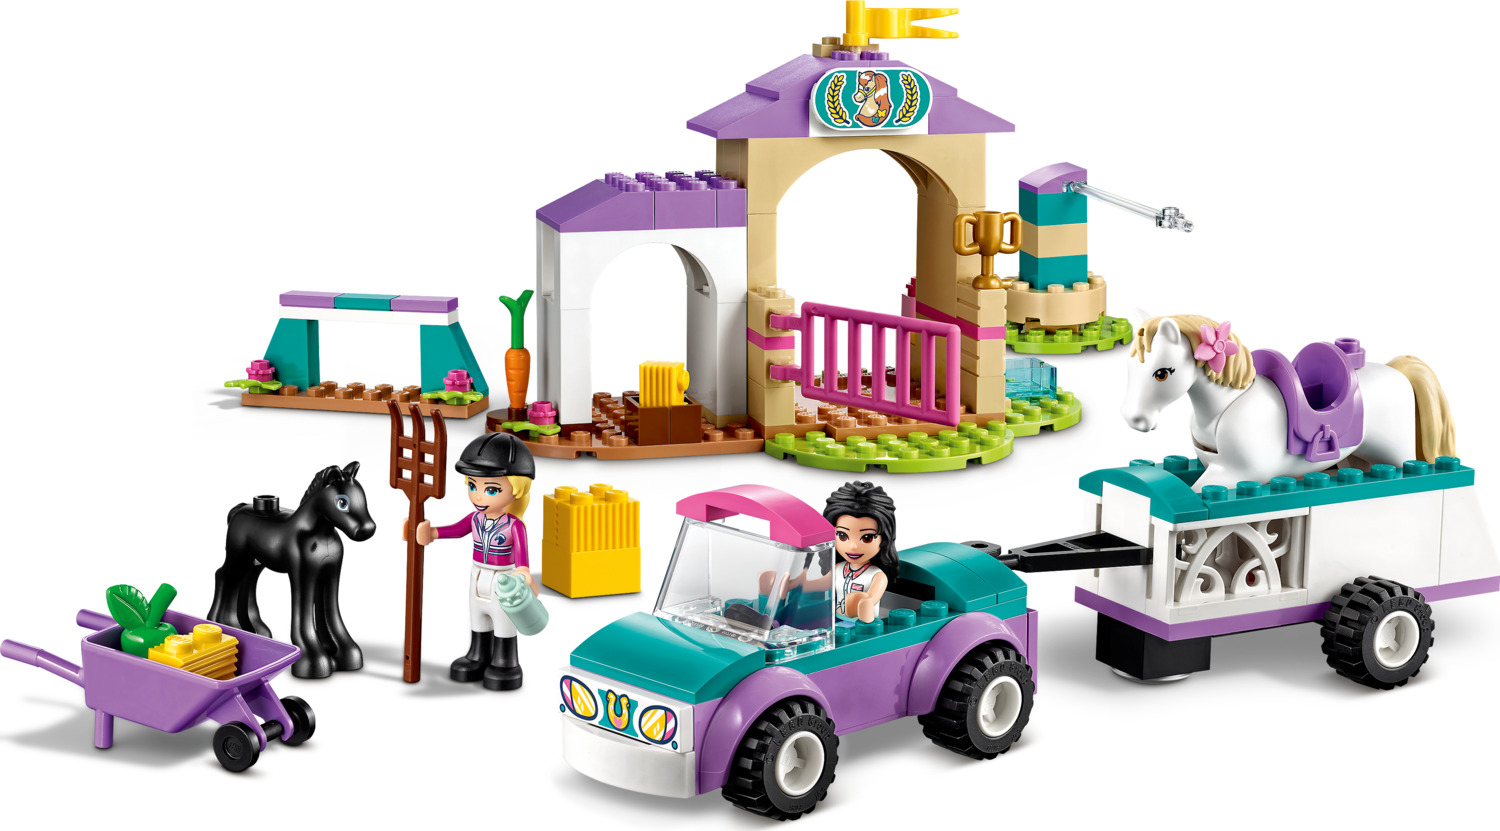 LEGO Friends: Training and Trailer - Imagine That Toys